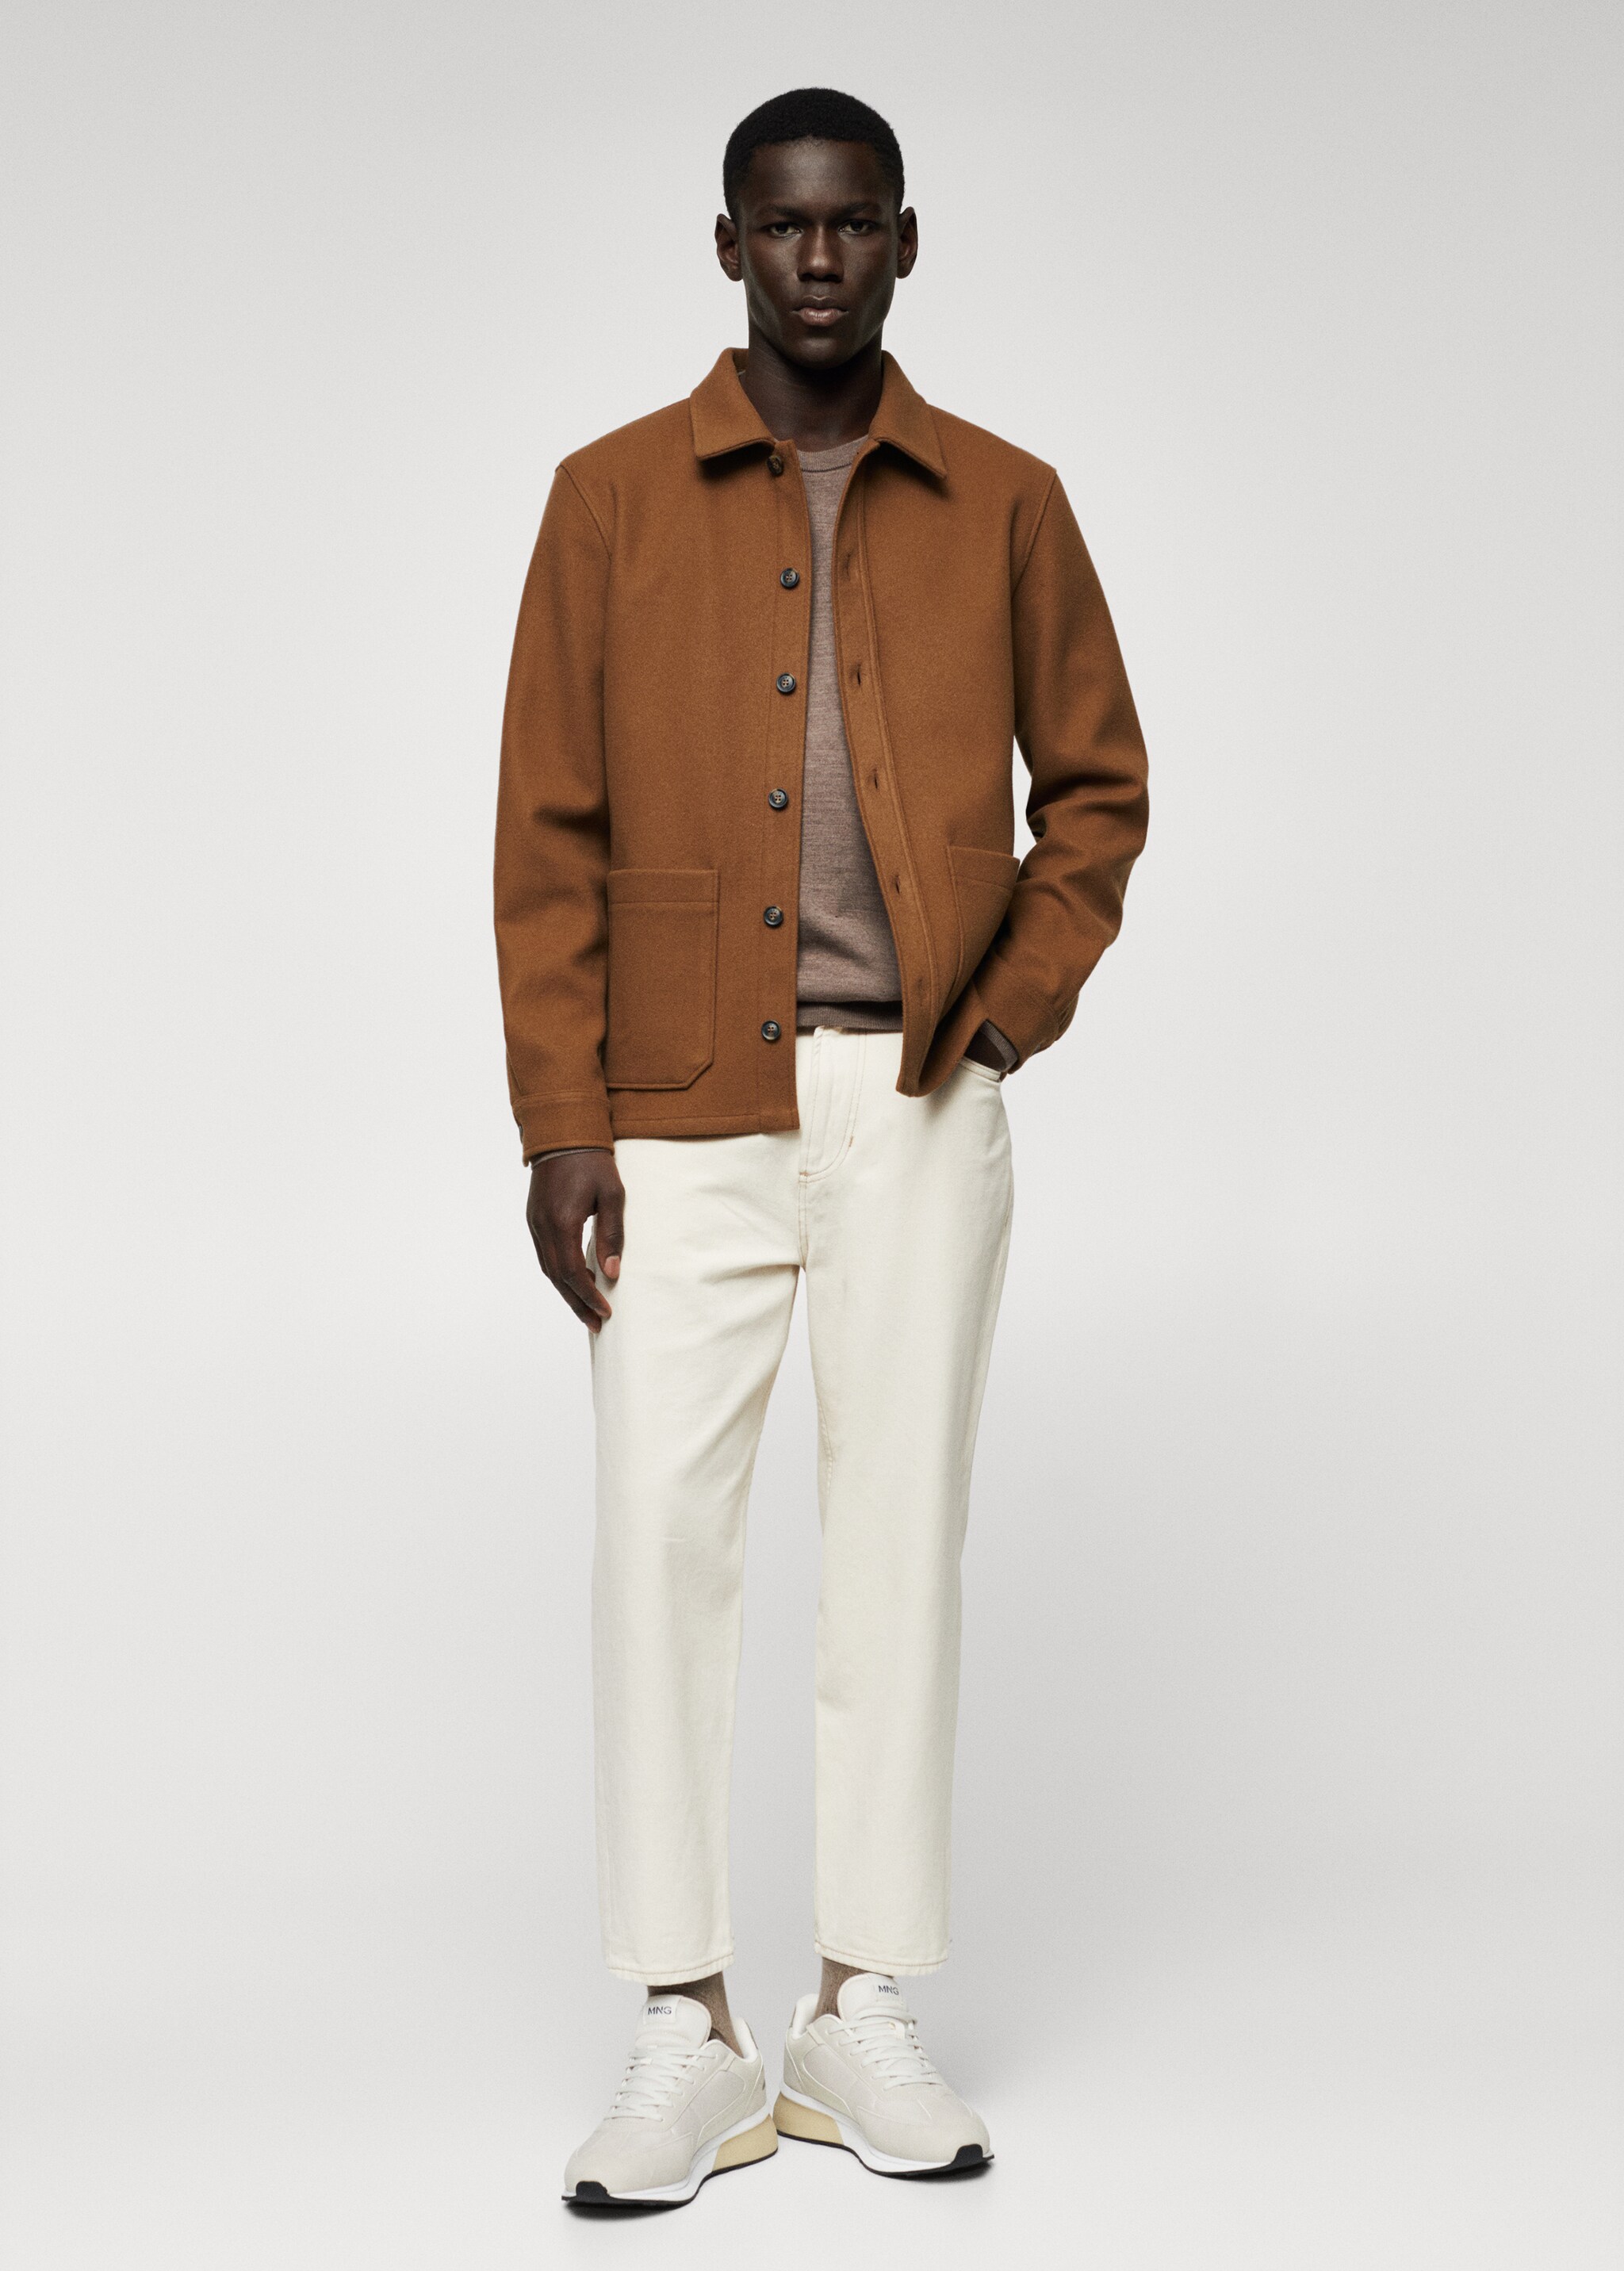 Textured overshirt with pockets - General plane